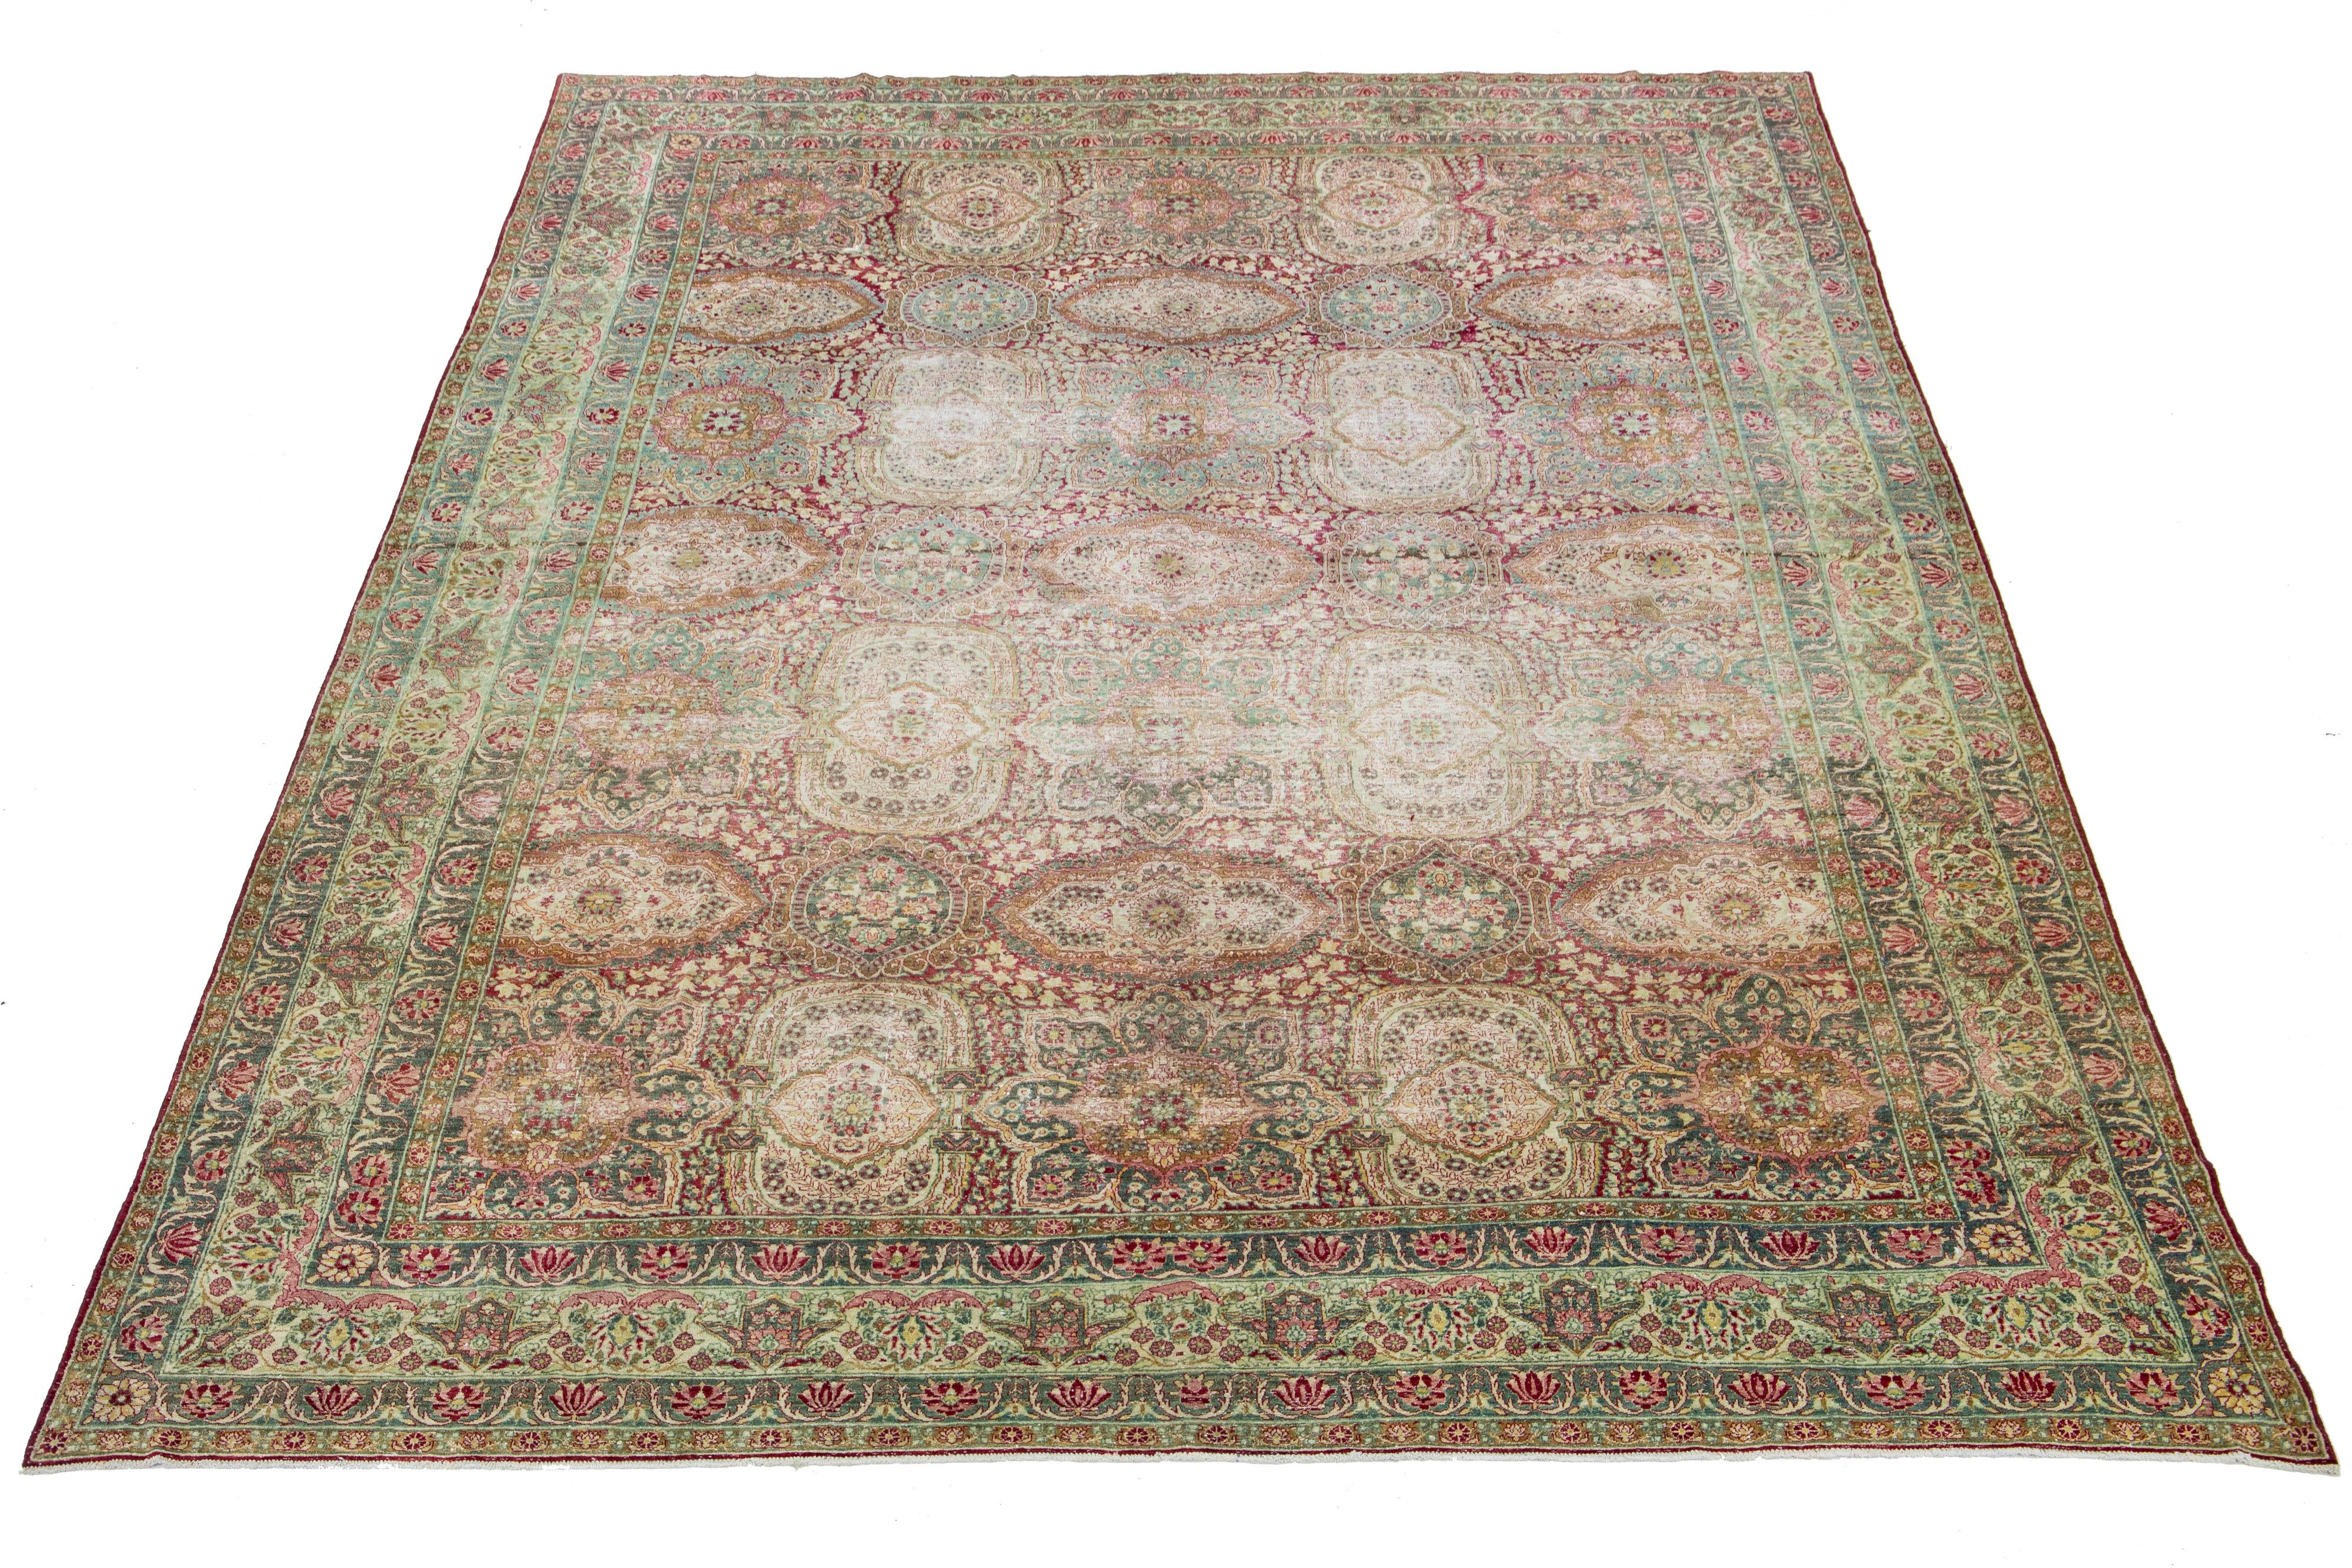 This hand-knotted wool rug from Kerman boasts a charming antique finish. The rug's raspberry-red color field is adorned with an all-over floral pattern, highlighted by hints of rich blue and rose—a remarkable piece of Persian craftsmanship.

This